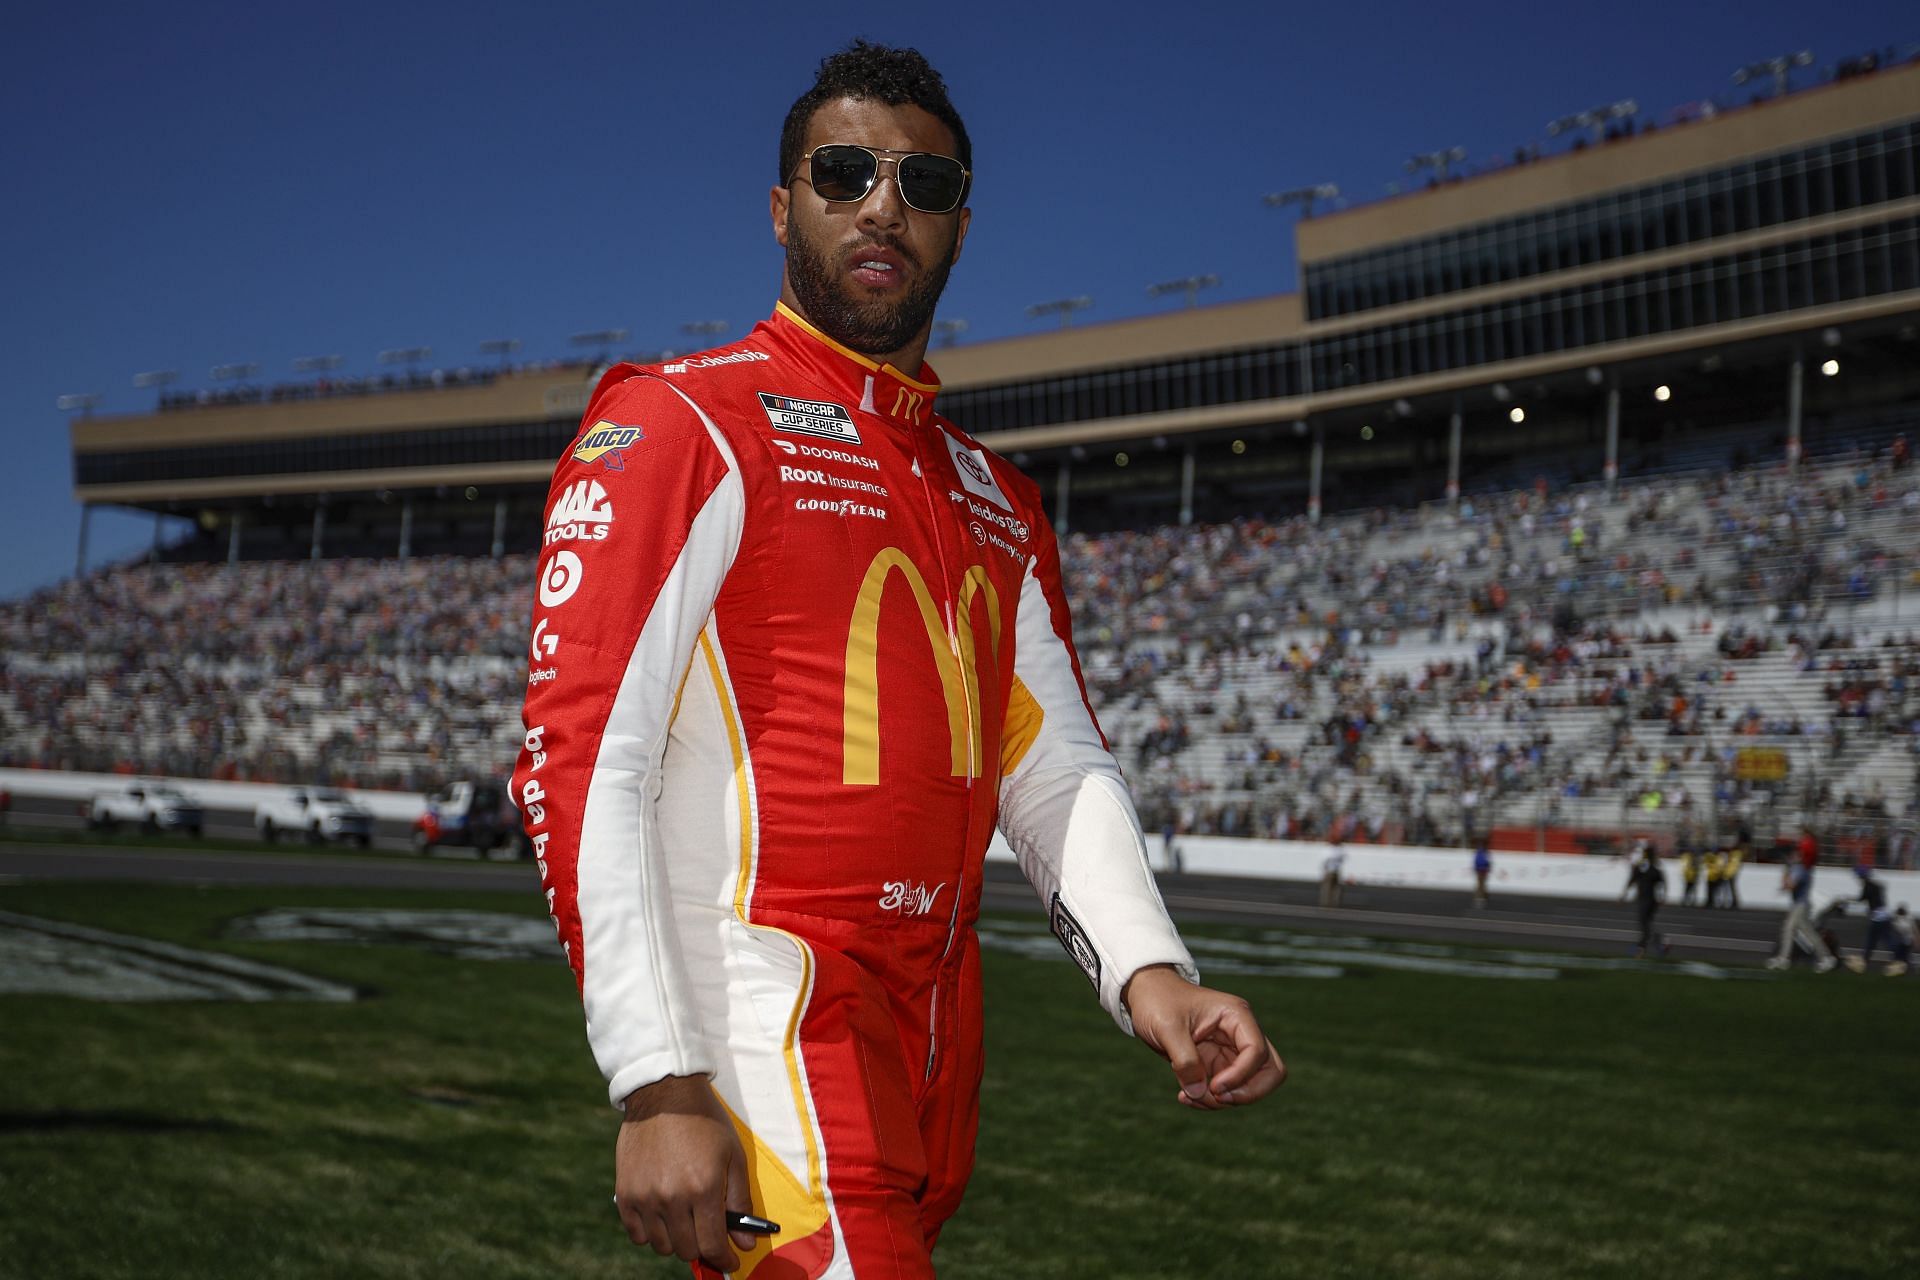 Bubba Wallace Jr. walks through the infield grass prior to the NASCAR Cup Series Folds of Honor QuikTrip 500. (Photo by Sean Gardner/Getty Images)